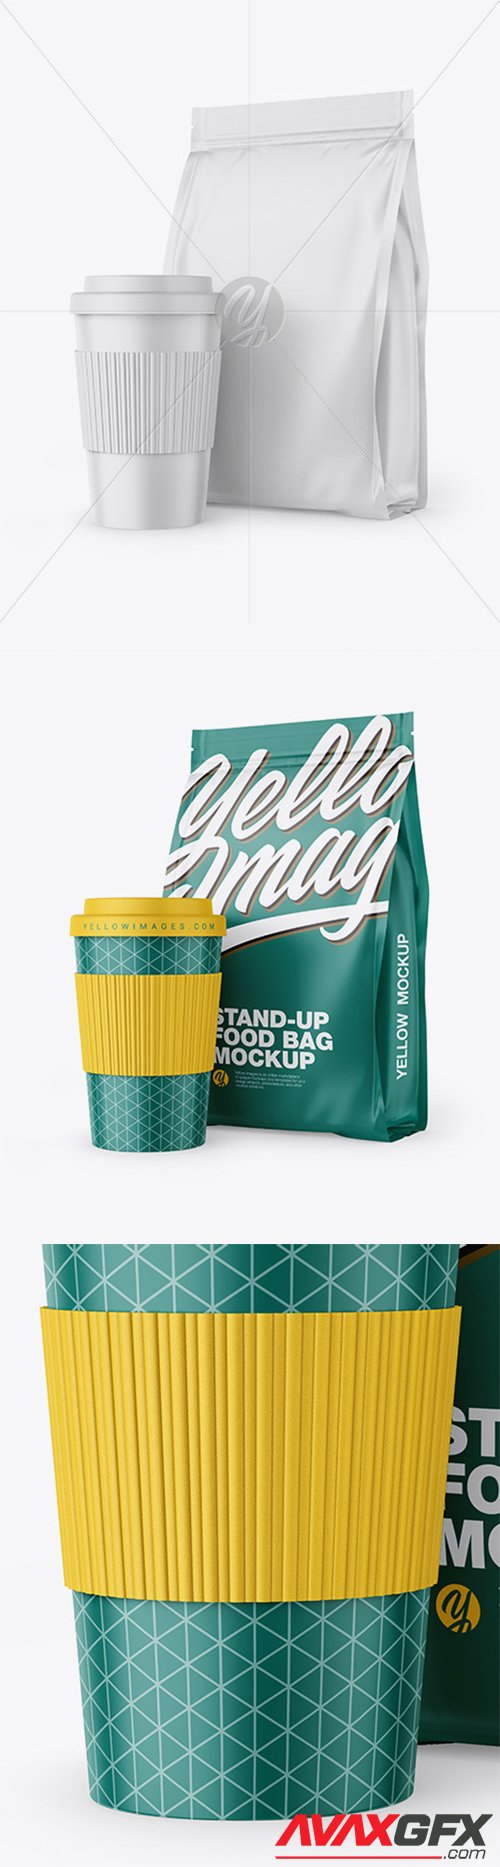 Matte Stand Up Bag With Coffee Cup Mockup 64586 Avaxgfx All Downloads That You Need In One Place Graphic From Nitroflare Rapidgator